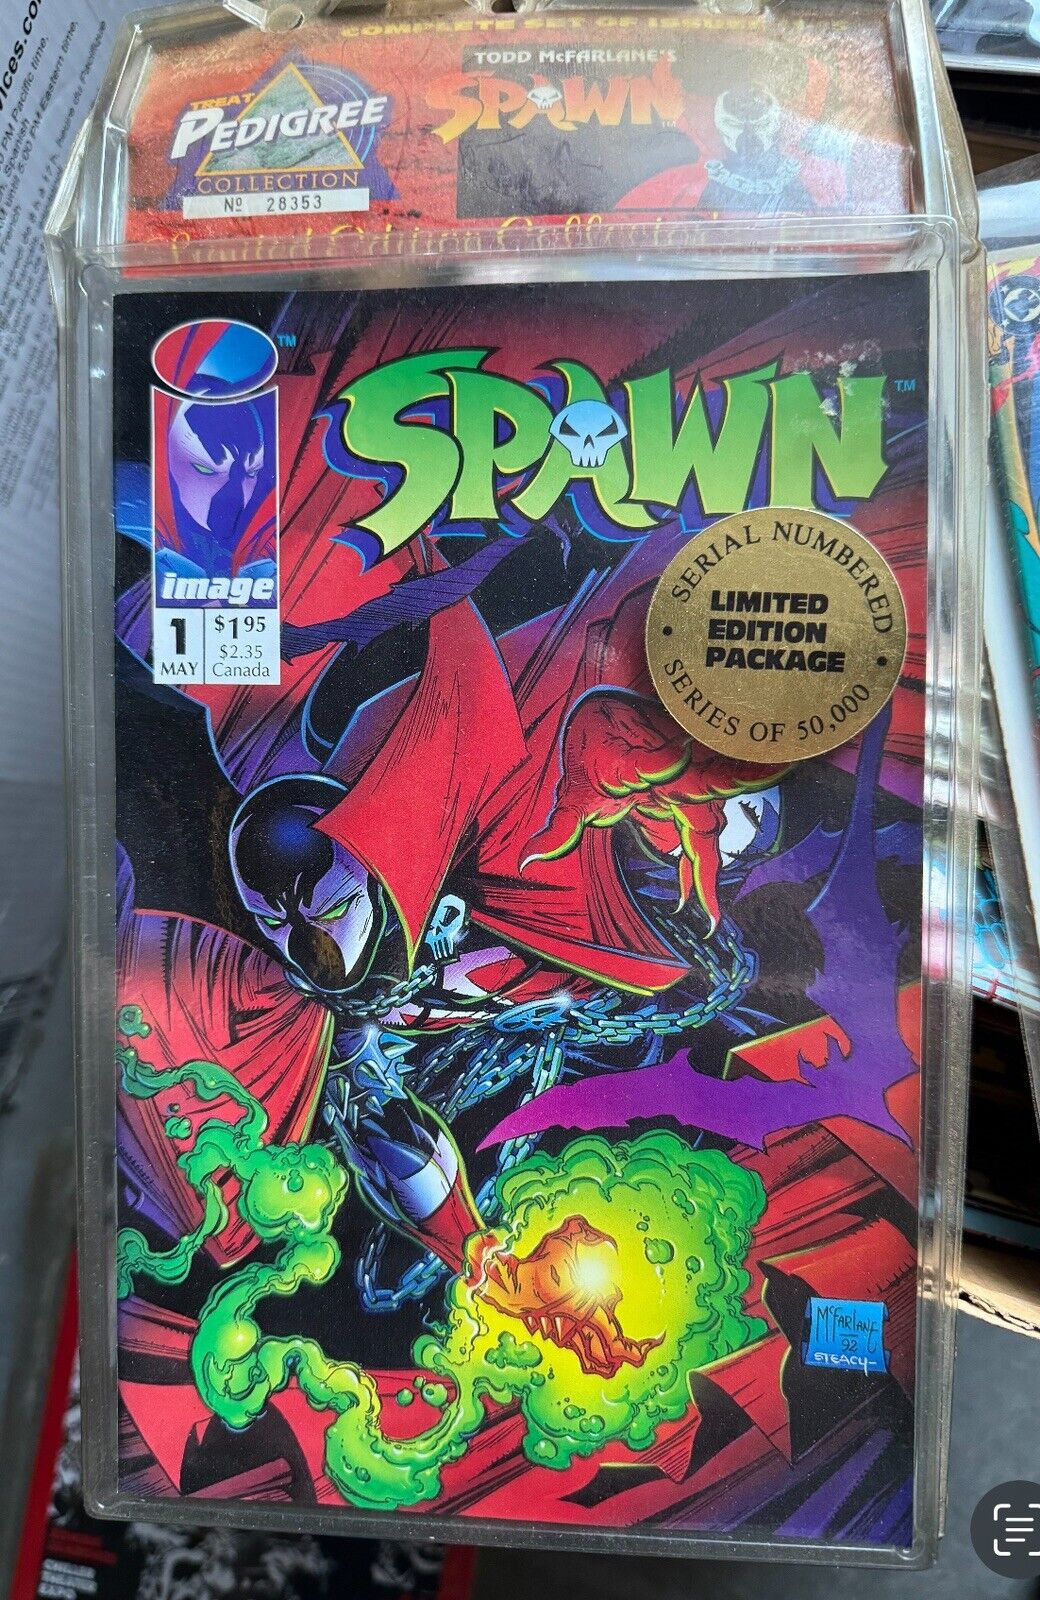 1992/1993 SPAWN LIMITED EDITION COLLECTOR'S PACK -RARE PEDIGREE ISSUES#1-5